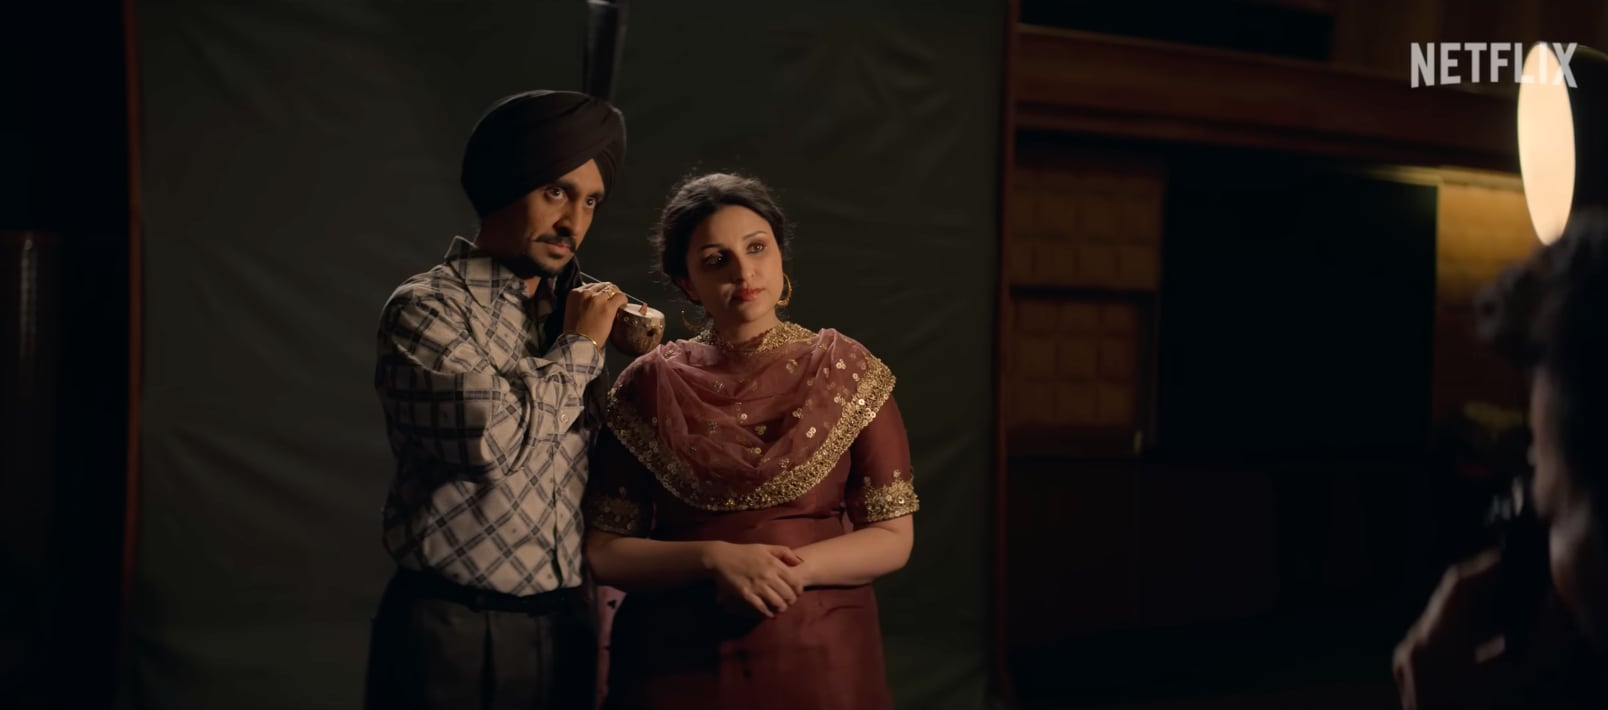 chamkila review: diljit dosanjh delivers a delectable act in this melodious yet tragic musical biopic